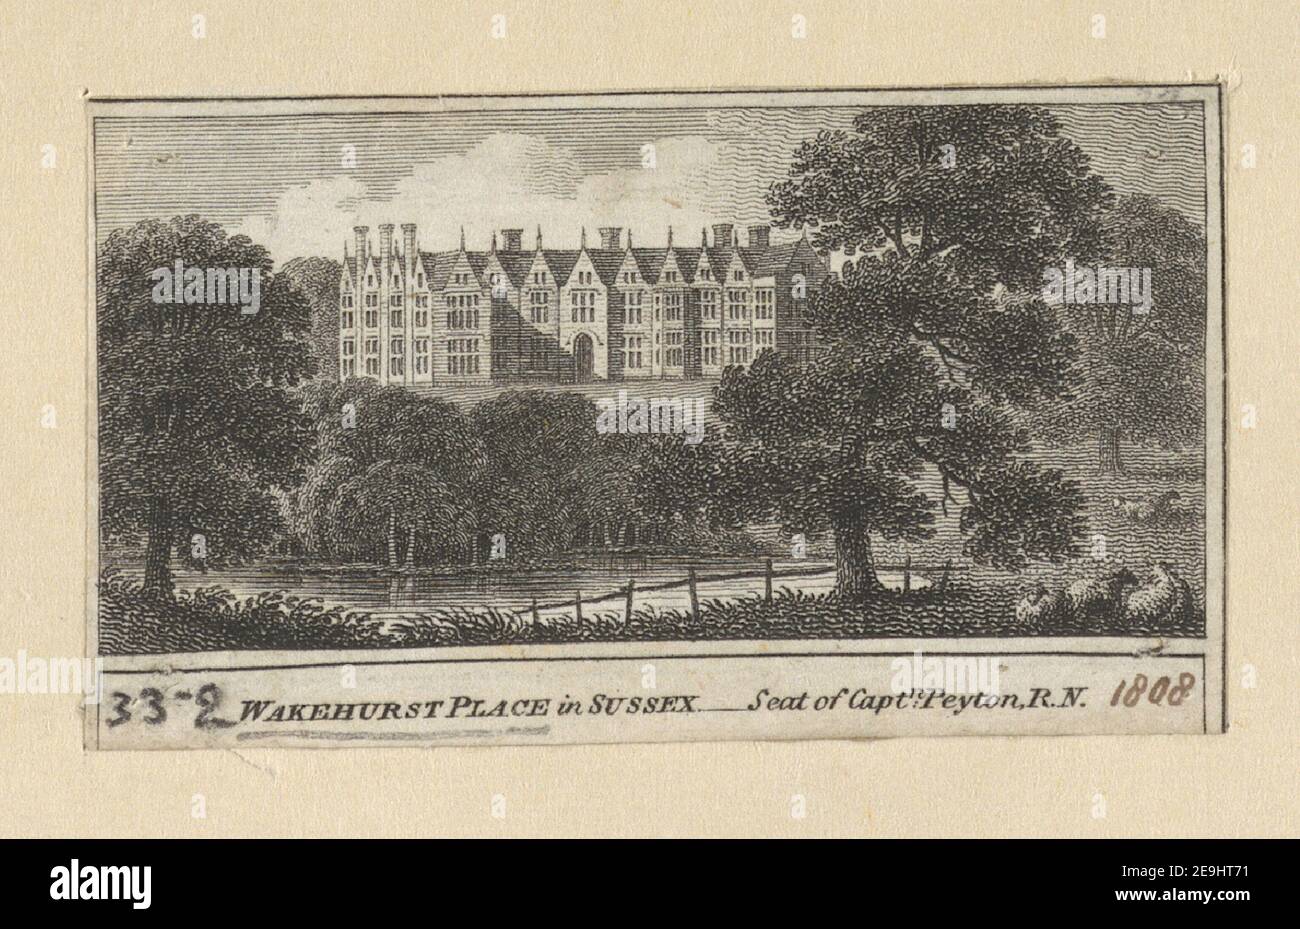 WAKEHURST PLACE in Sussex.   Seat of Capt. Peyton R.N. Visual Material information:  Title: WAKEHURST PLACE in Sussex. - Seat of Capt. Peyton R.N. 42.33.2. Place of publication: [London] Publisher: [W. Peacock]., Date of publication: [1808]  Item type: 1 print Medium: etching Dimensions: sheet 3.4 x 6.0 cm [trimmed within platemark].  Former owner: George III, King of Great Britain, 1738-1820 Stock Photo